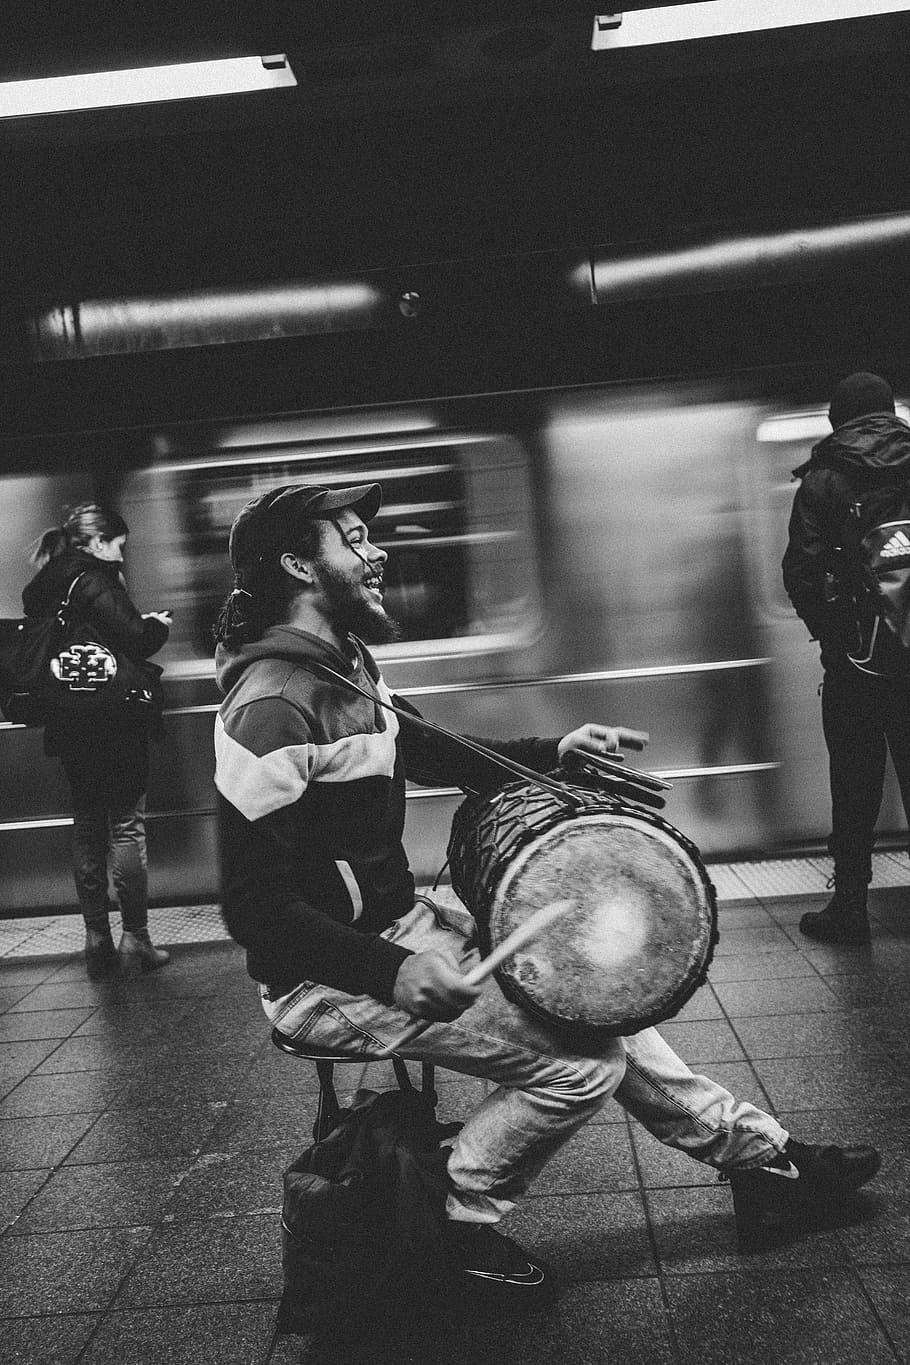 man playing drum in subway, greyscale photography of man playing drum on train station beside two person waiting for train